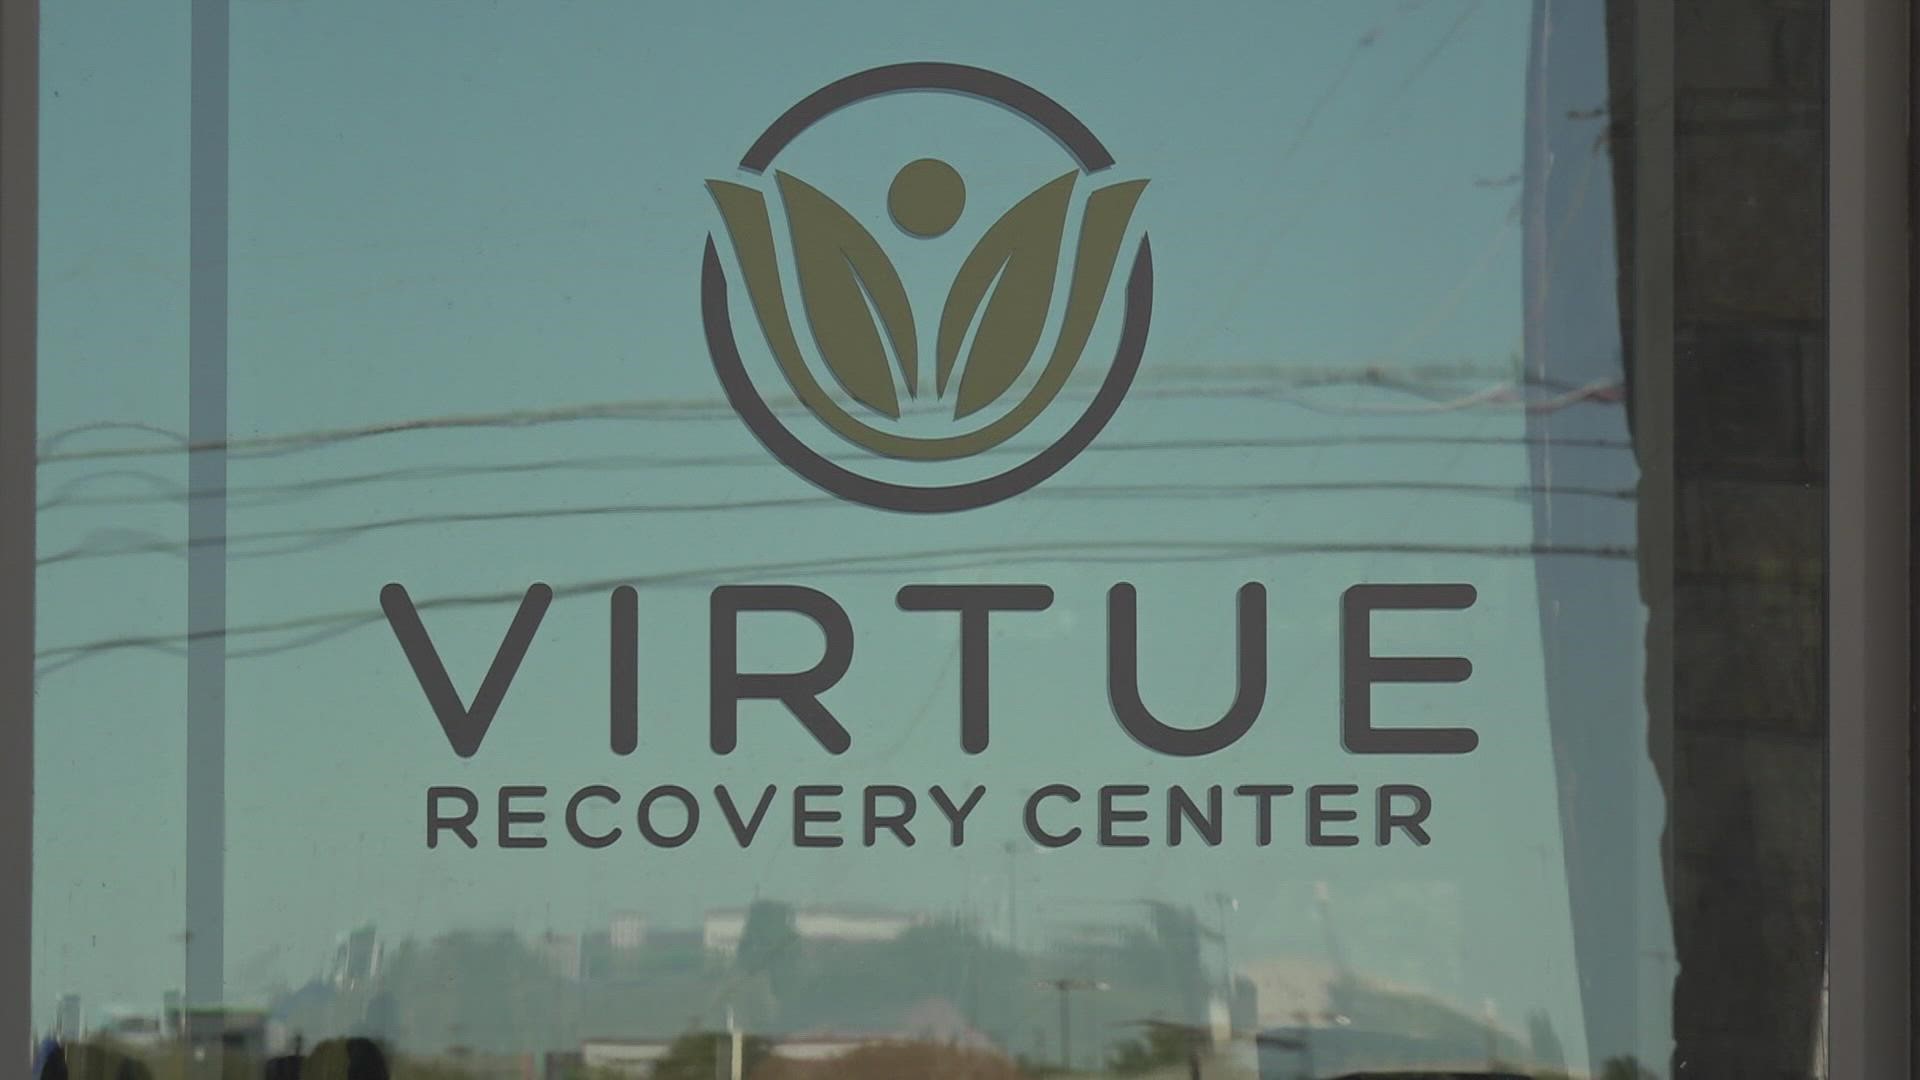 The Virtue Recovery Center will offer a variety of services to Central Texas veterans.